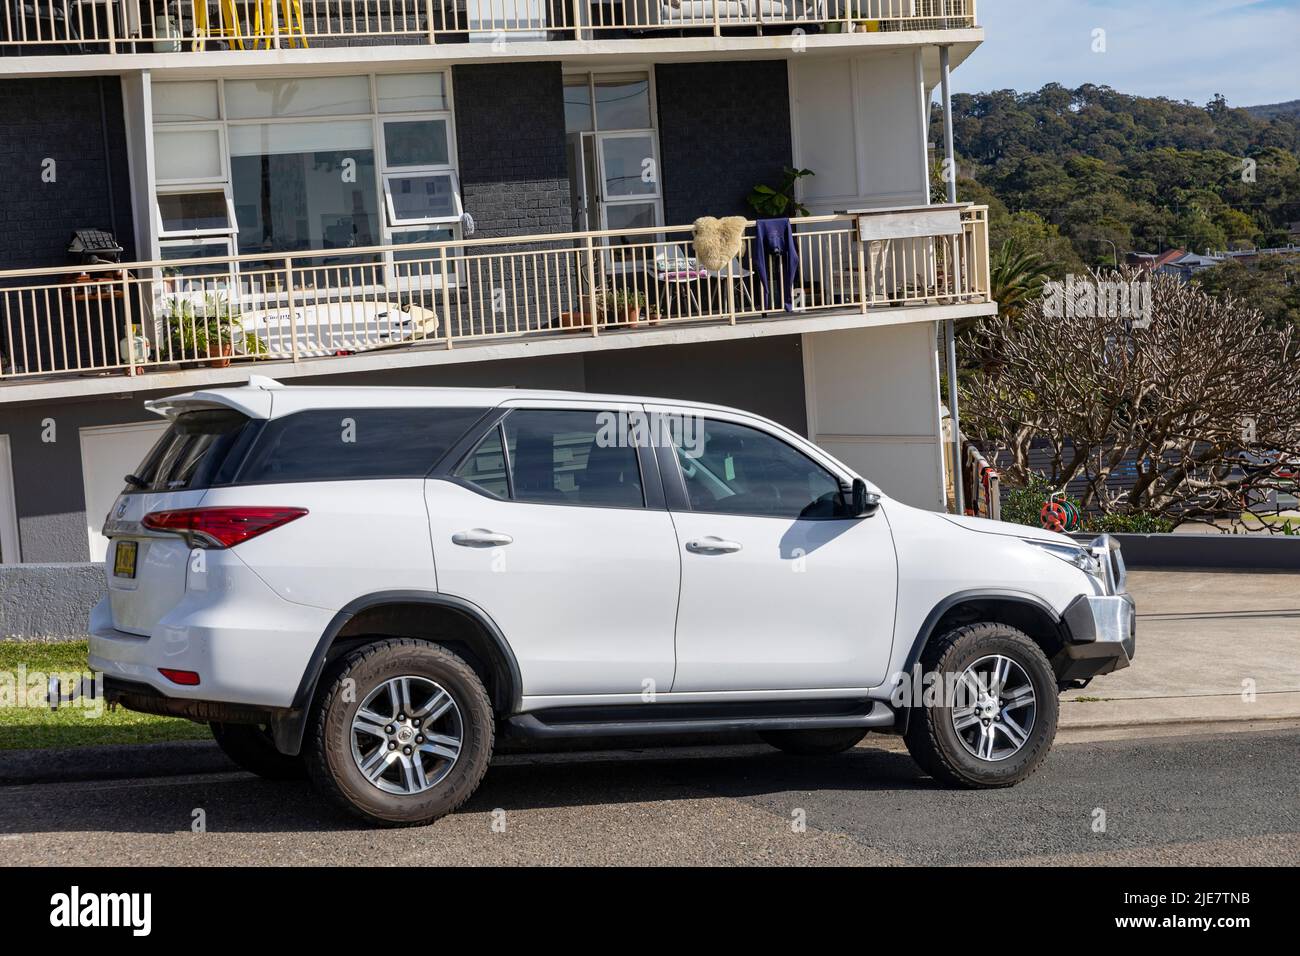 2020 model white Toyota Fortuner parked in Avalon Beach Sydney , a mid sized family SUV type vehicle also known as Toyota Hilux SW4,Australia Stock Photo